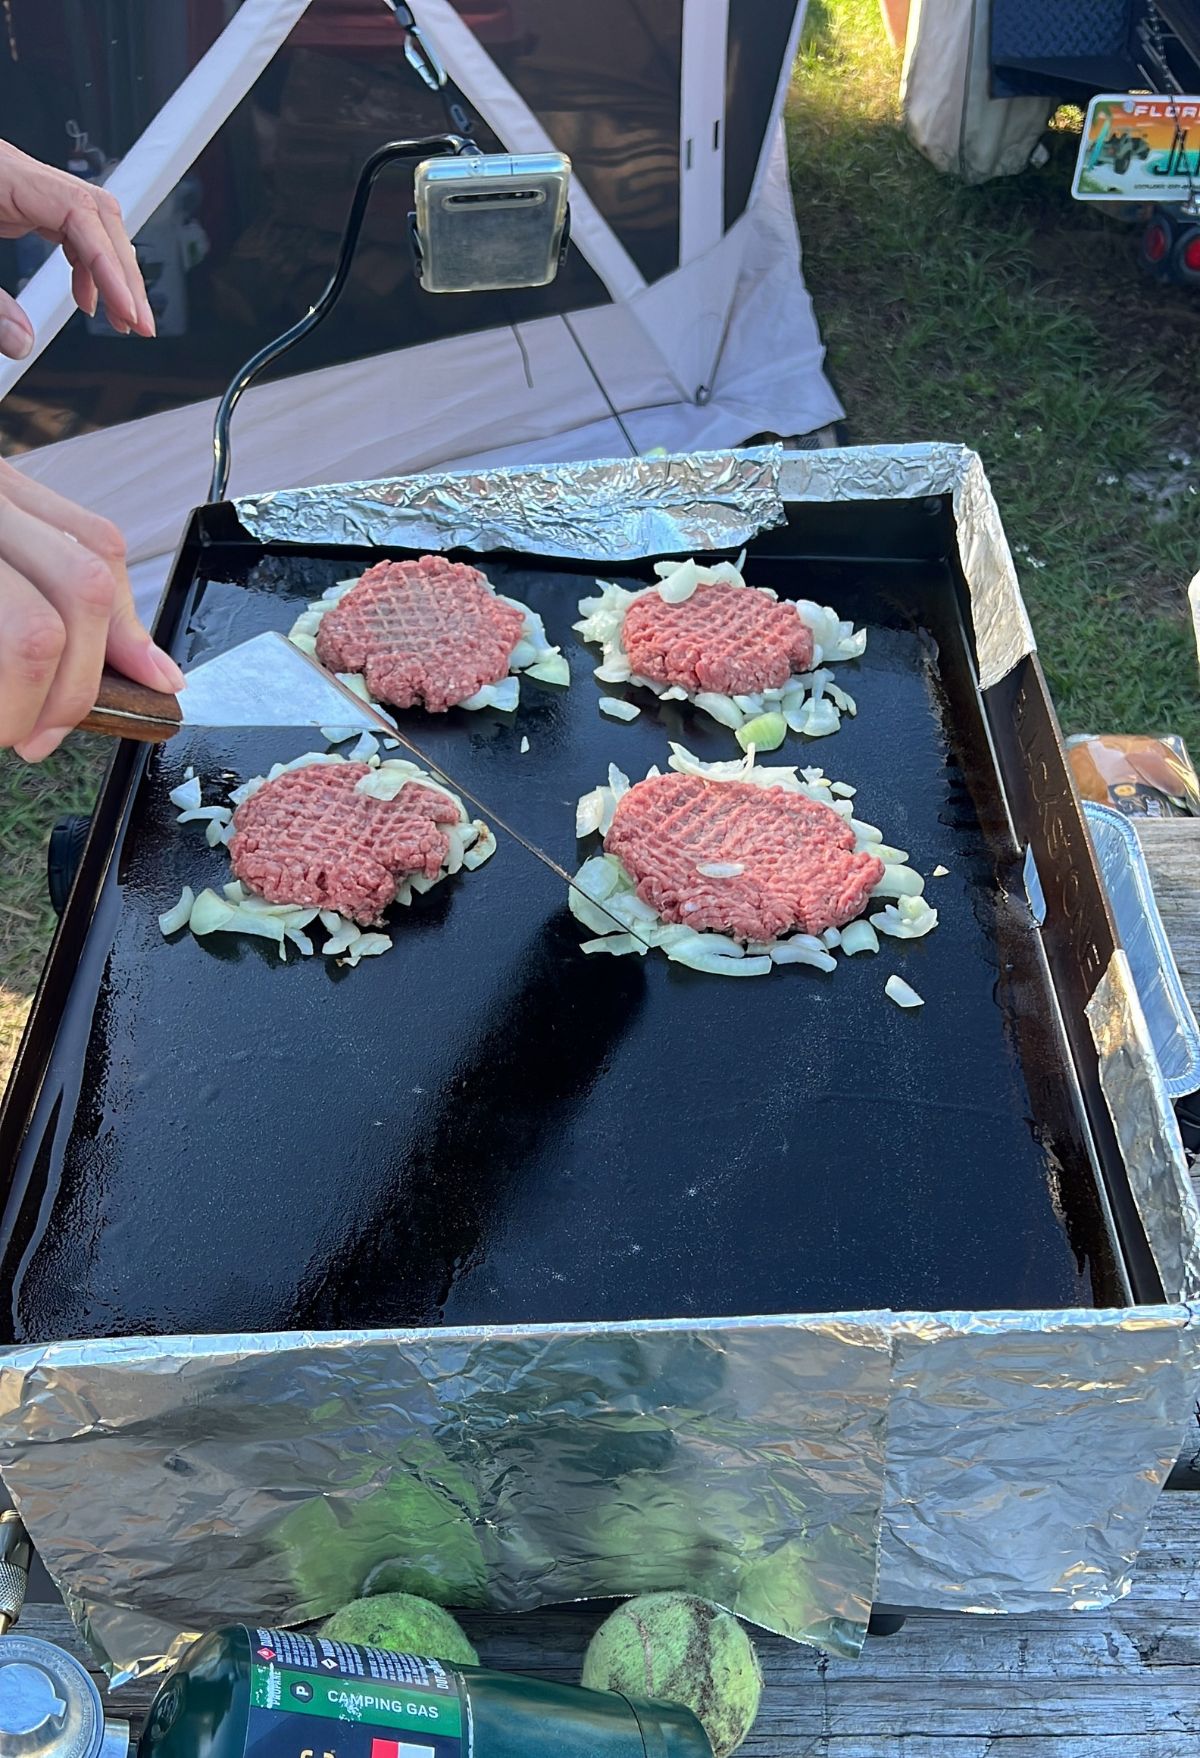 A person is preparing hamburgers on a grill.